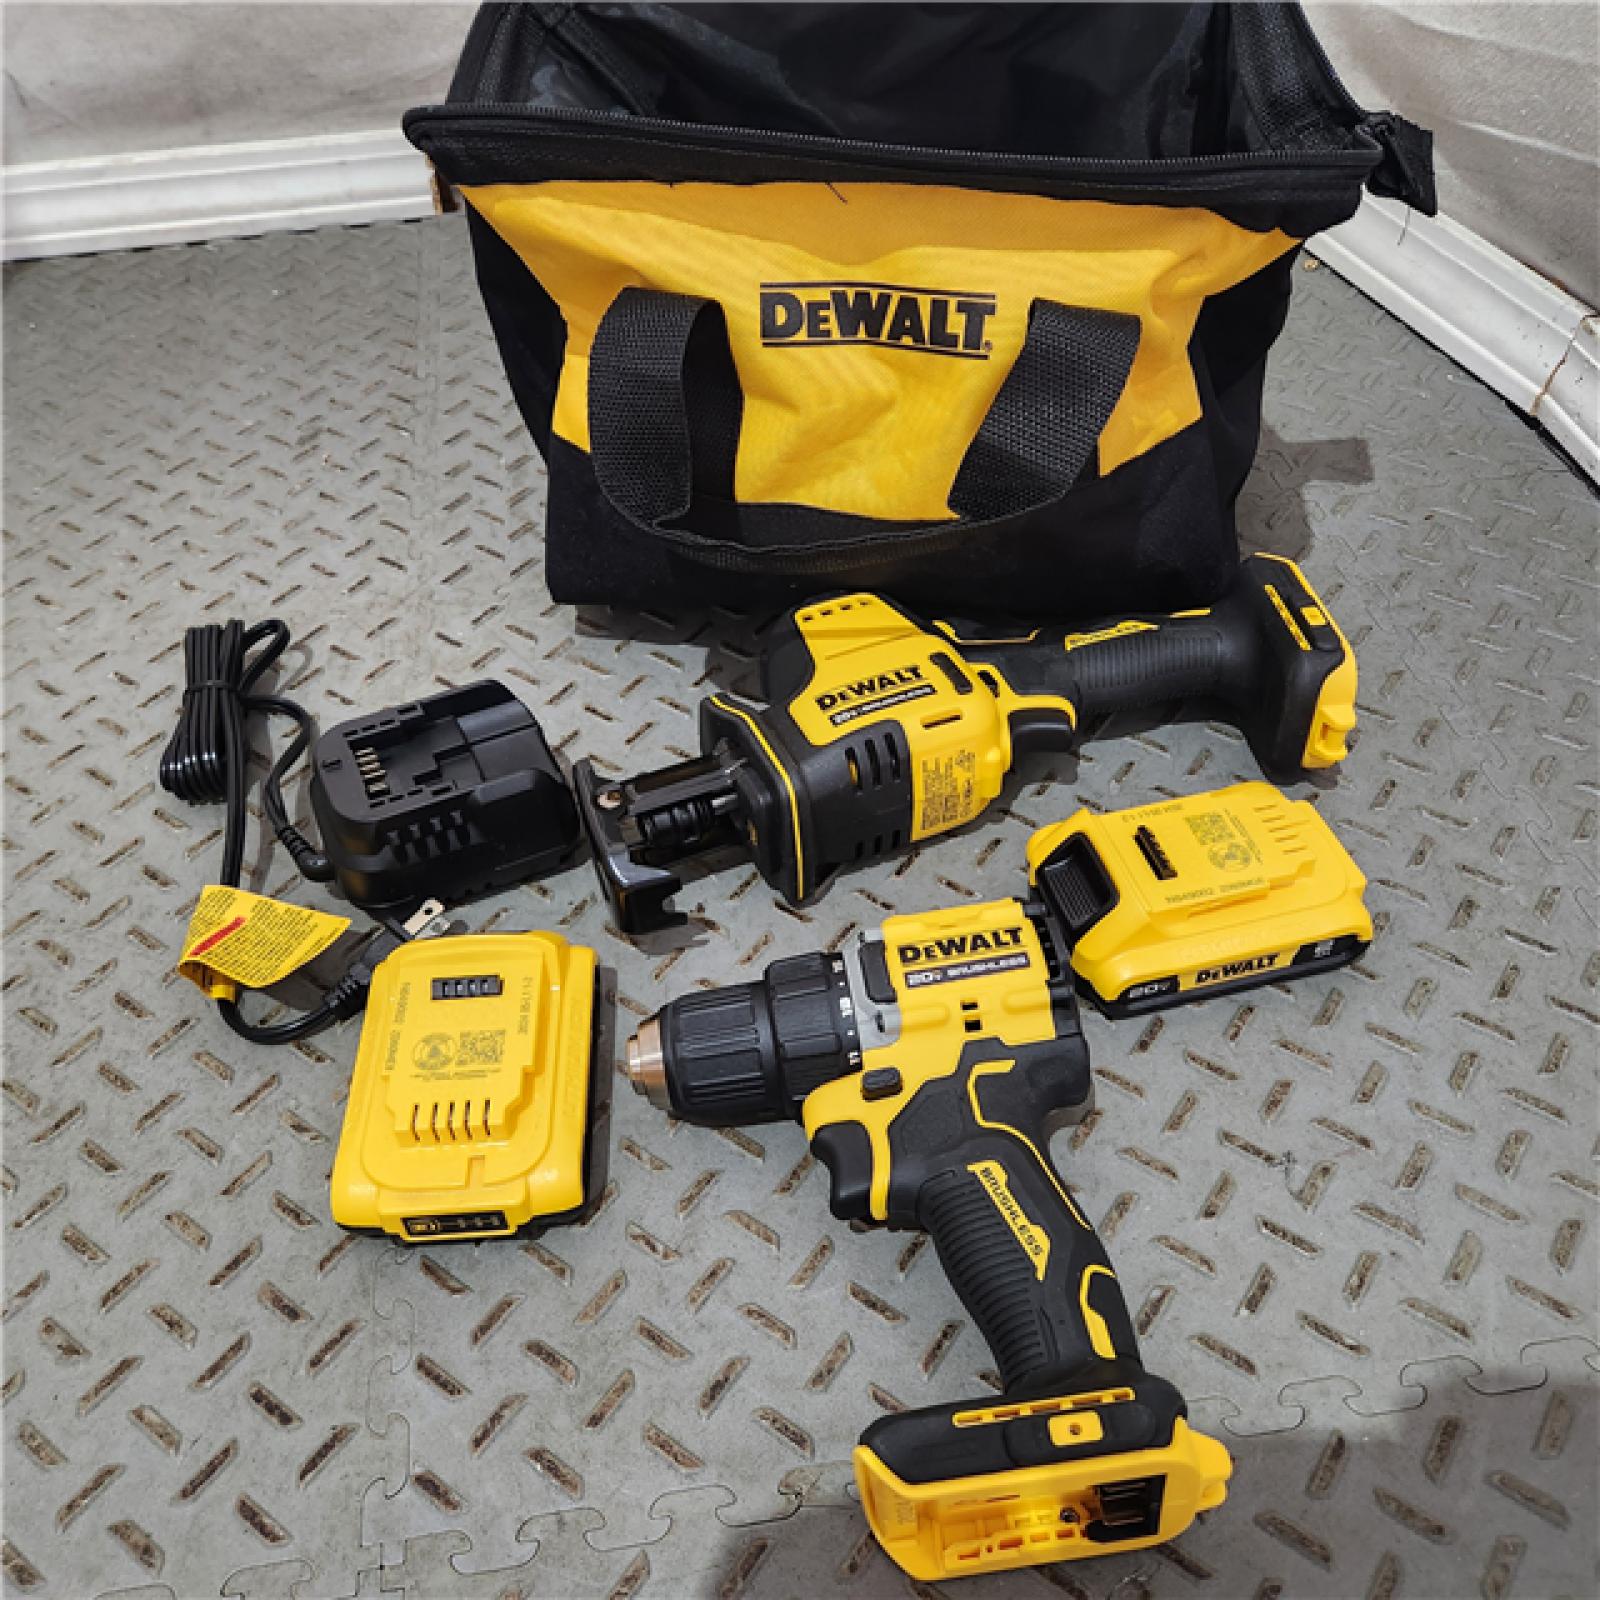 DEWALT DCD794B ATOMIC 20V MAX Lithium-Ion Compact Series Brushless Cordless 1/2 Drill/Driver (Tool Only)